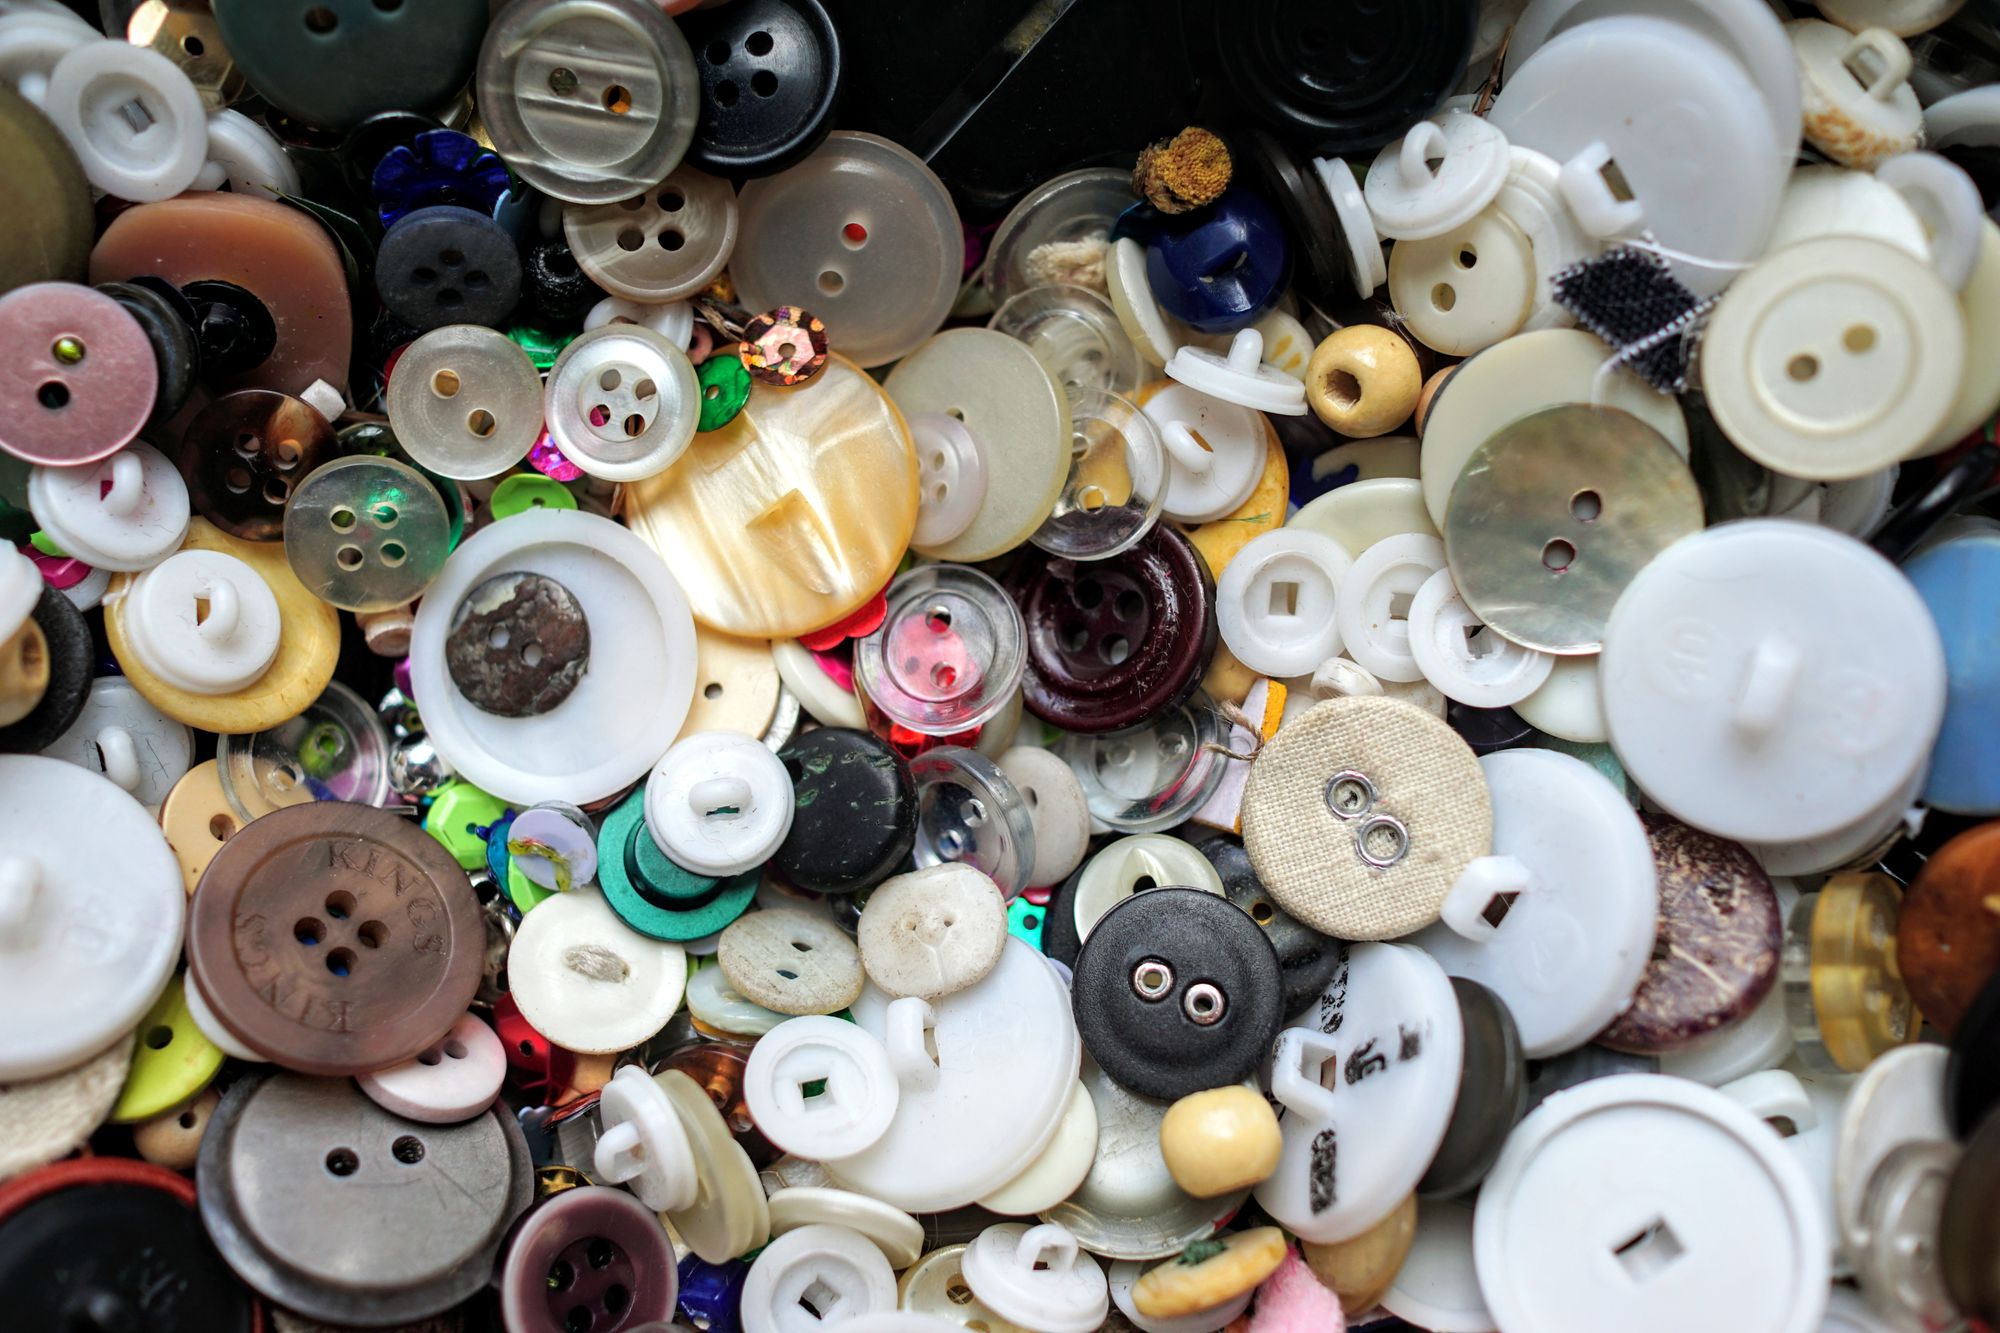 Buttons for clothes of all styles and sizes.